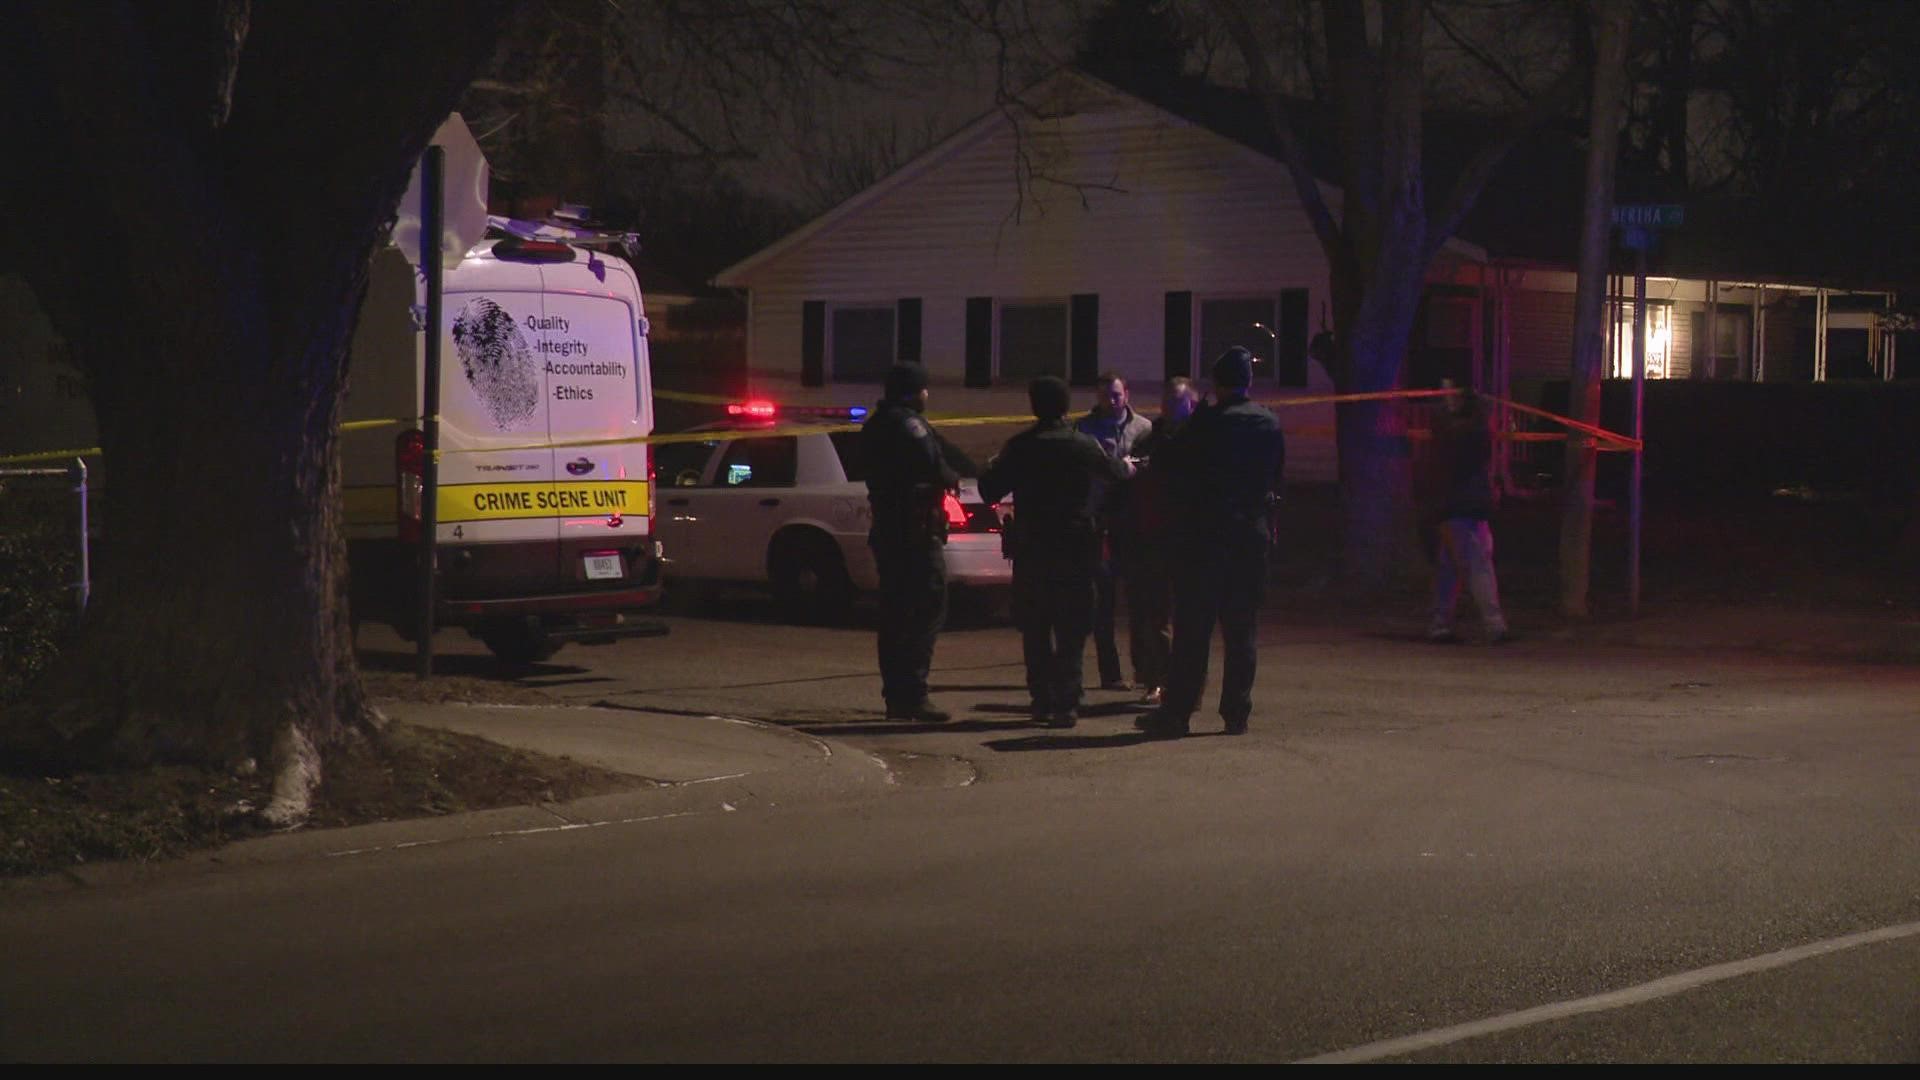 The shooting happened around 11:30 p.m. Thursday near Lynhurst Drive and Rockville Road.